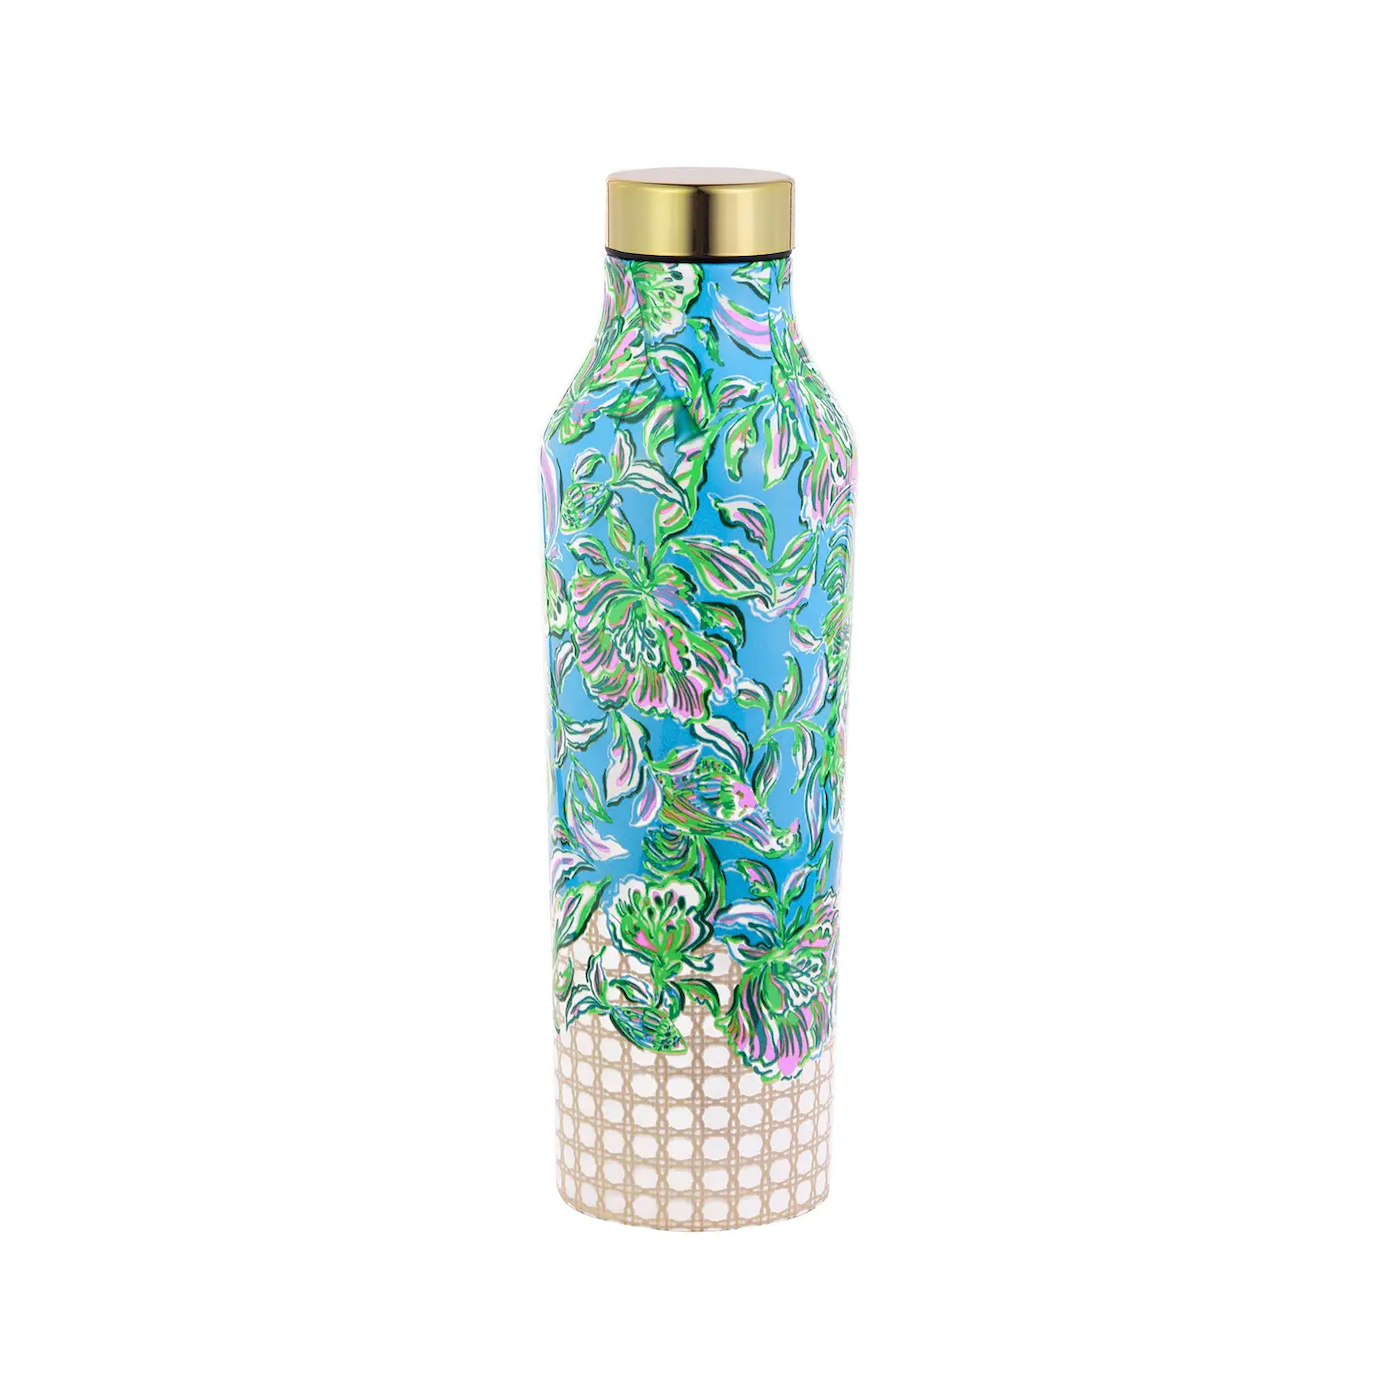 Lilly Pulitzer Stainless Steel Water Bottle - Chick Magnet